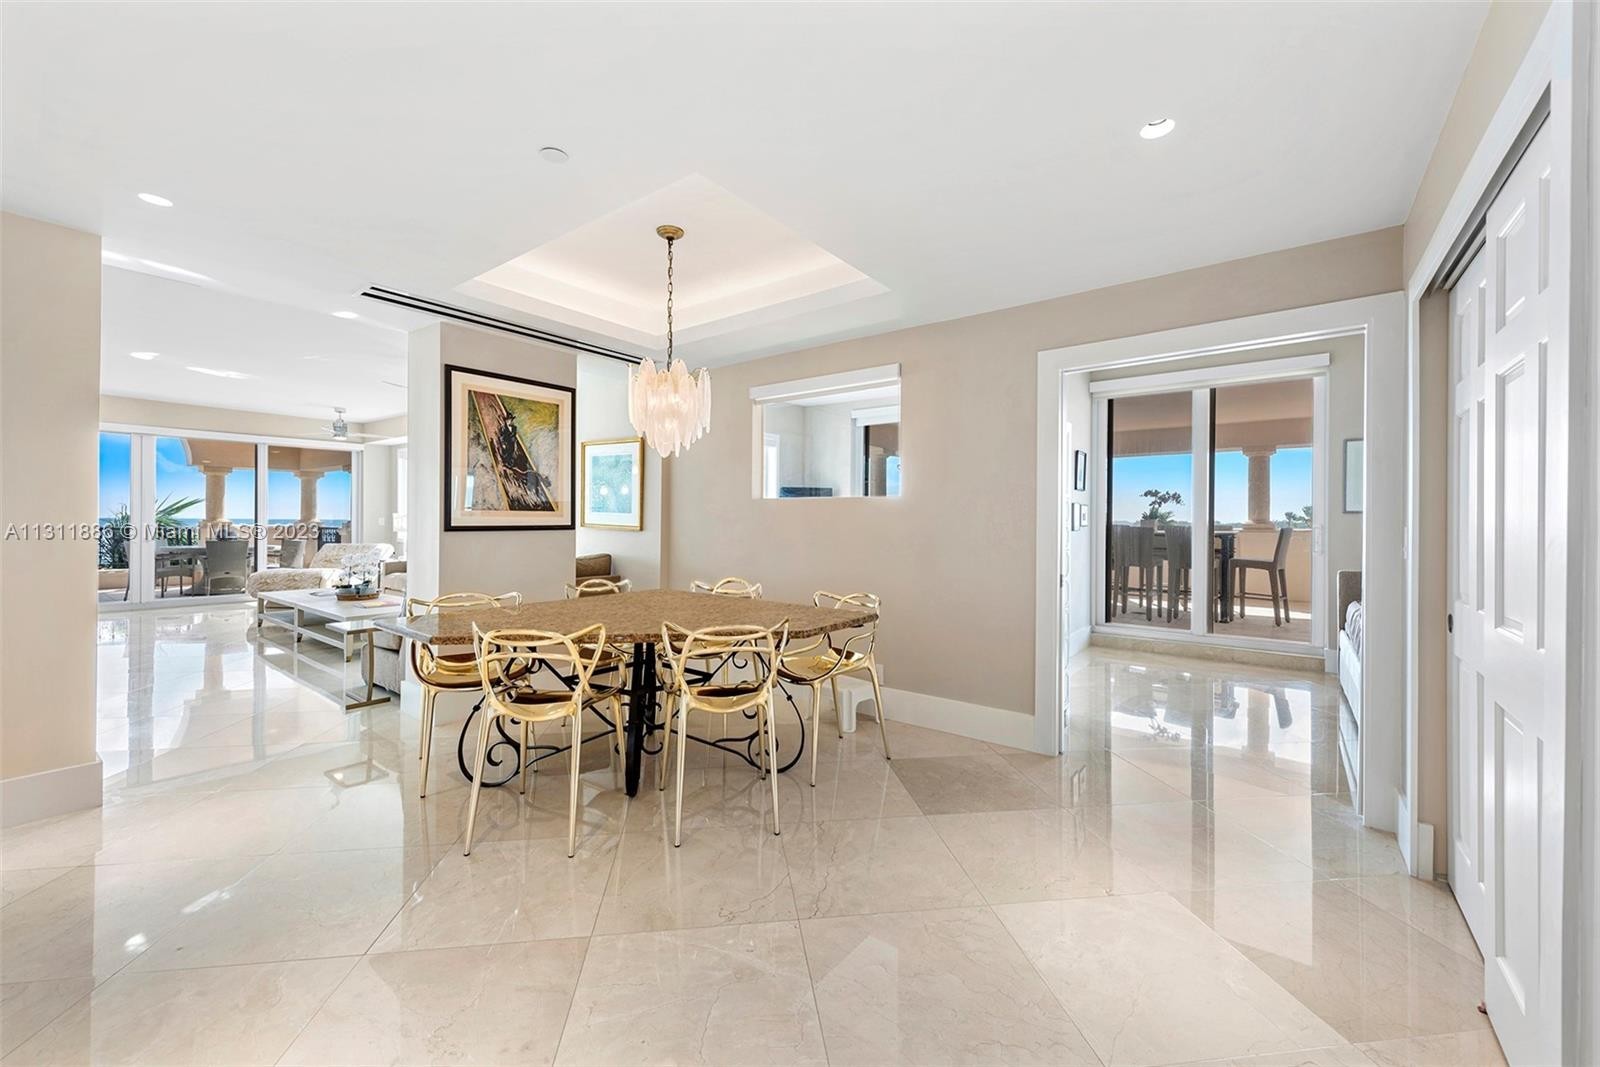 14. 19253 Fisher Island Dr